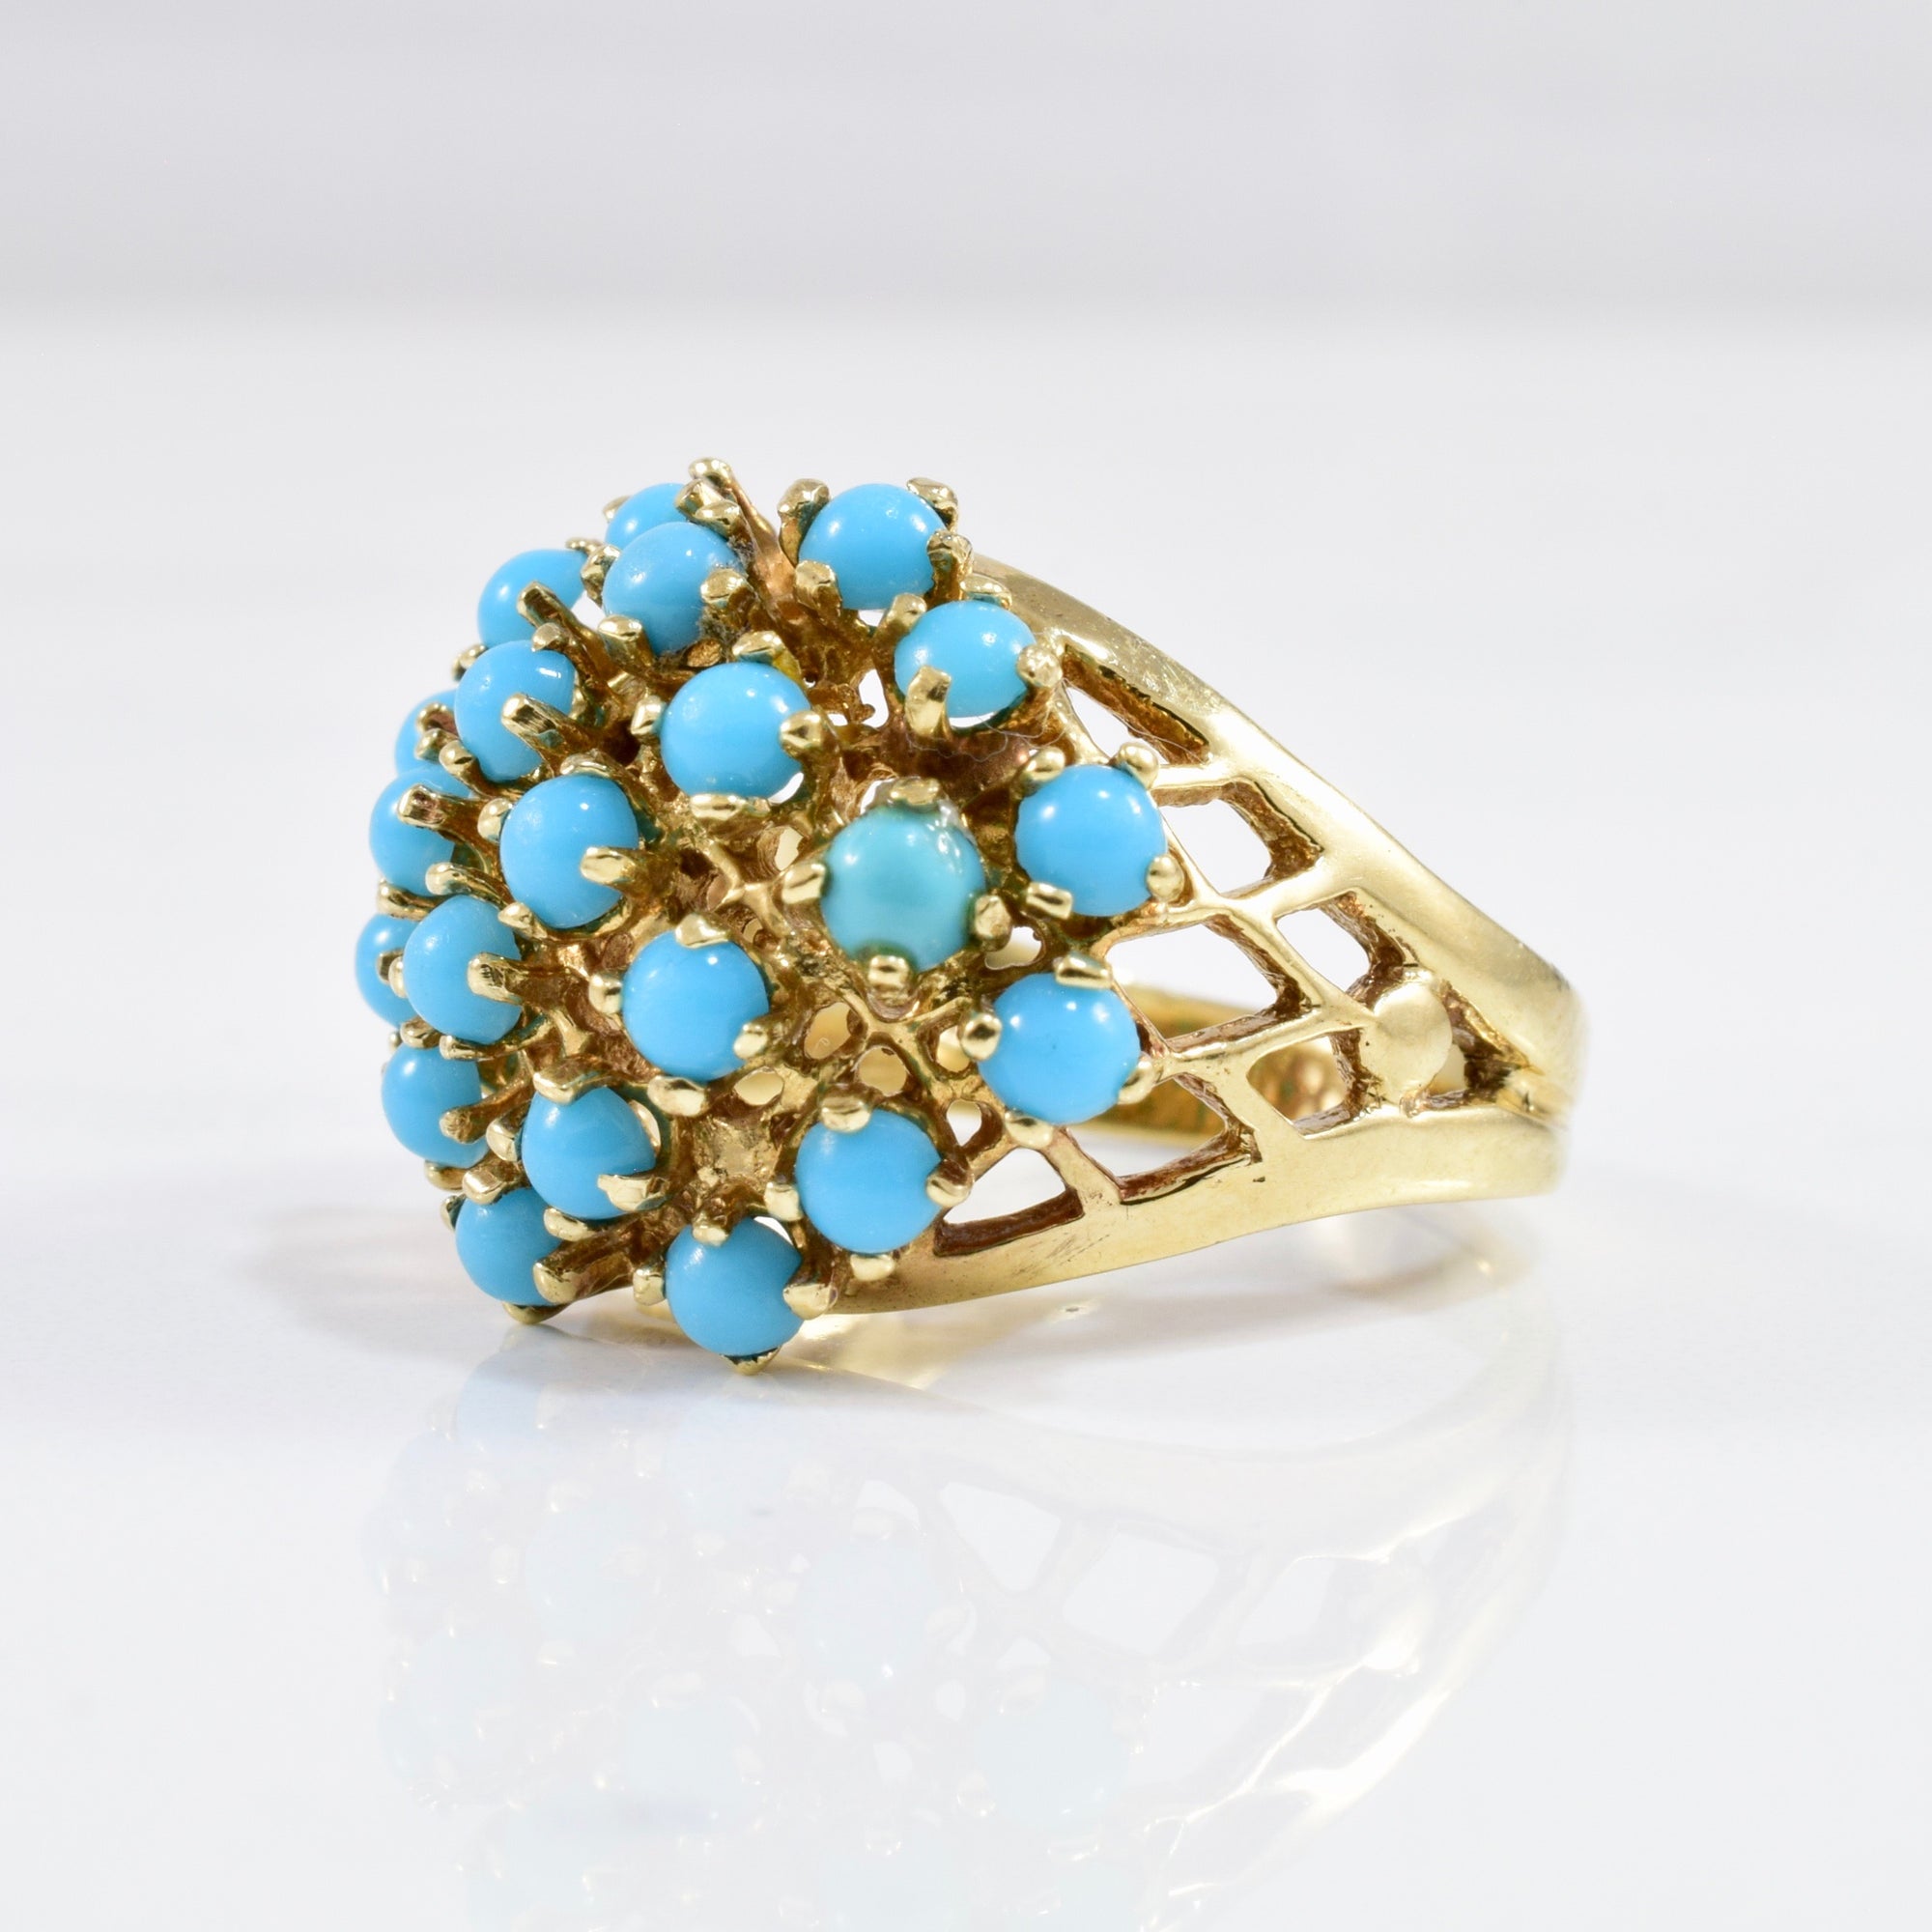 Turquoise Cluster Ring | SZ 7.25 |